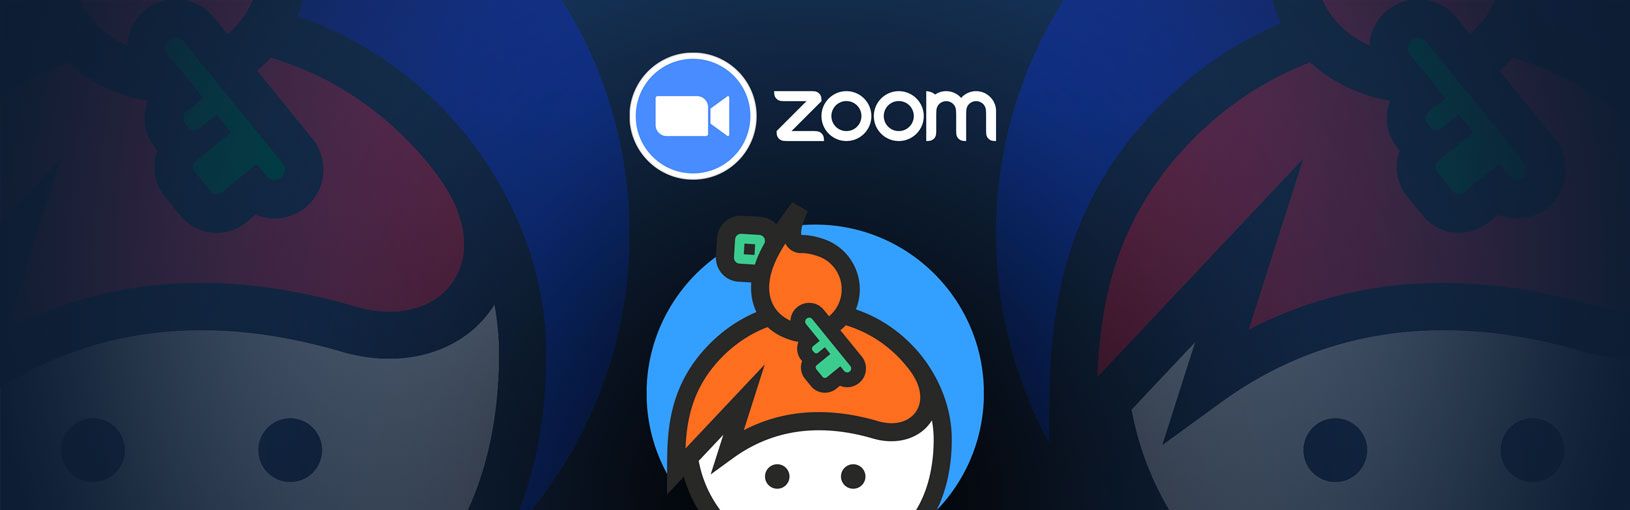 zoom keybase app kept images from